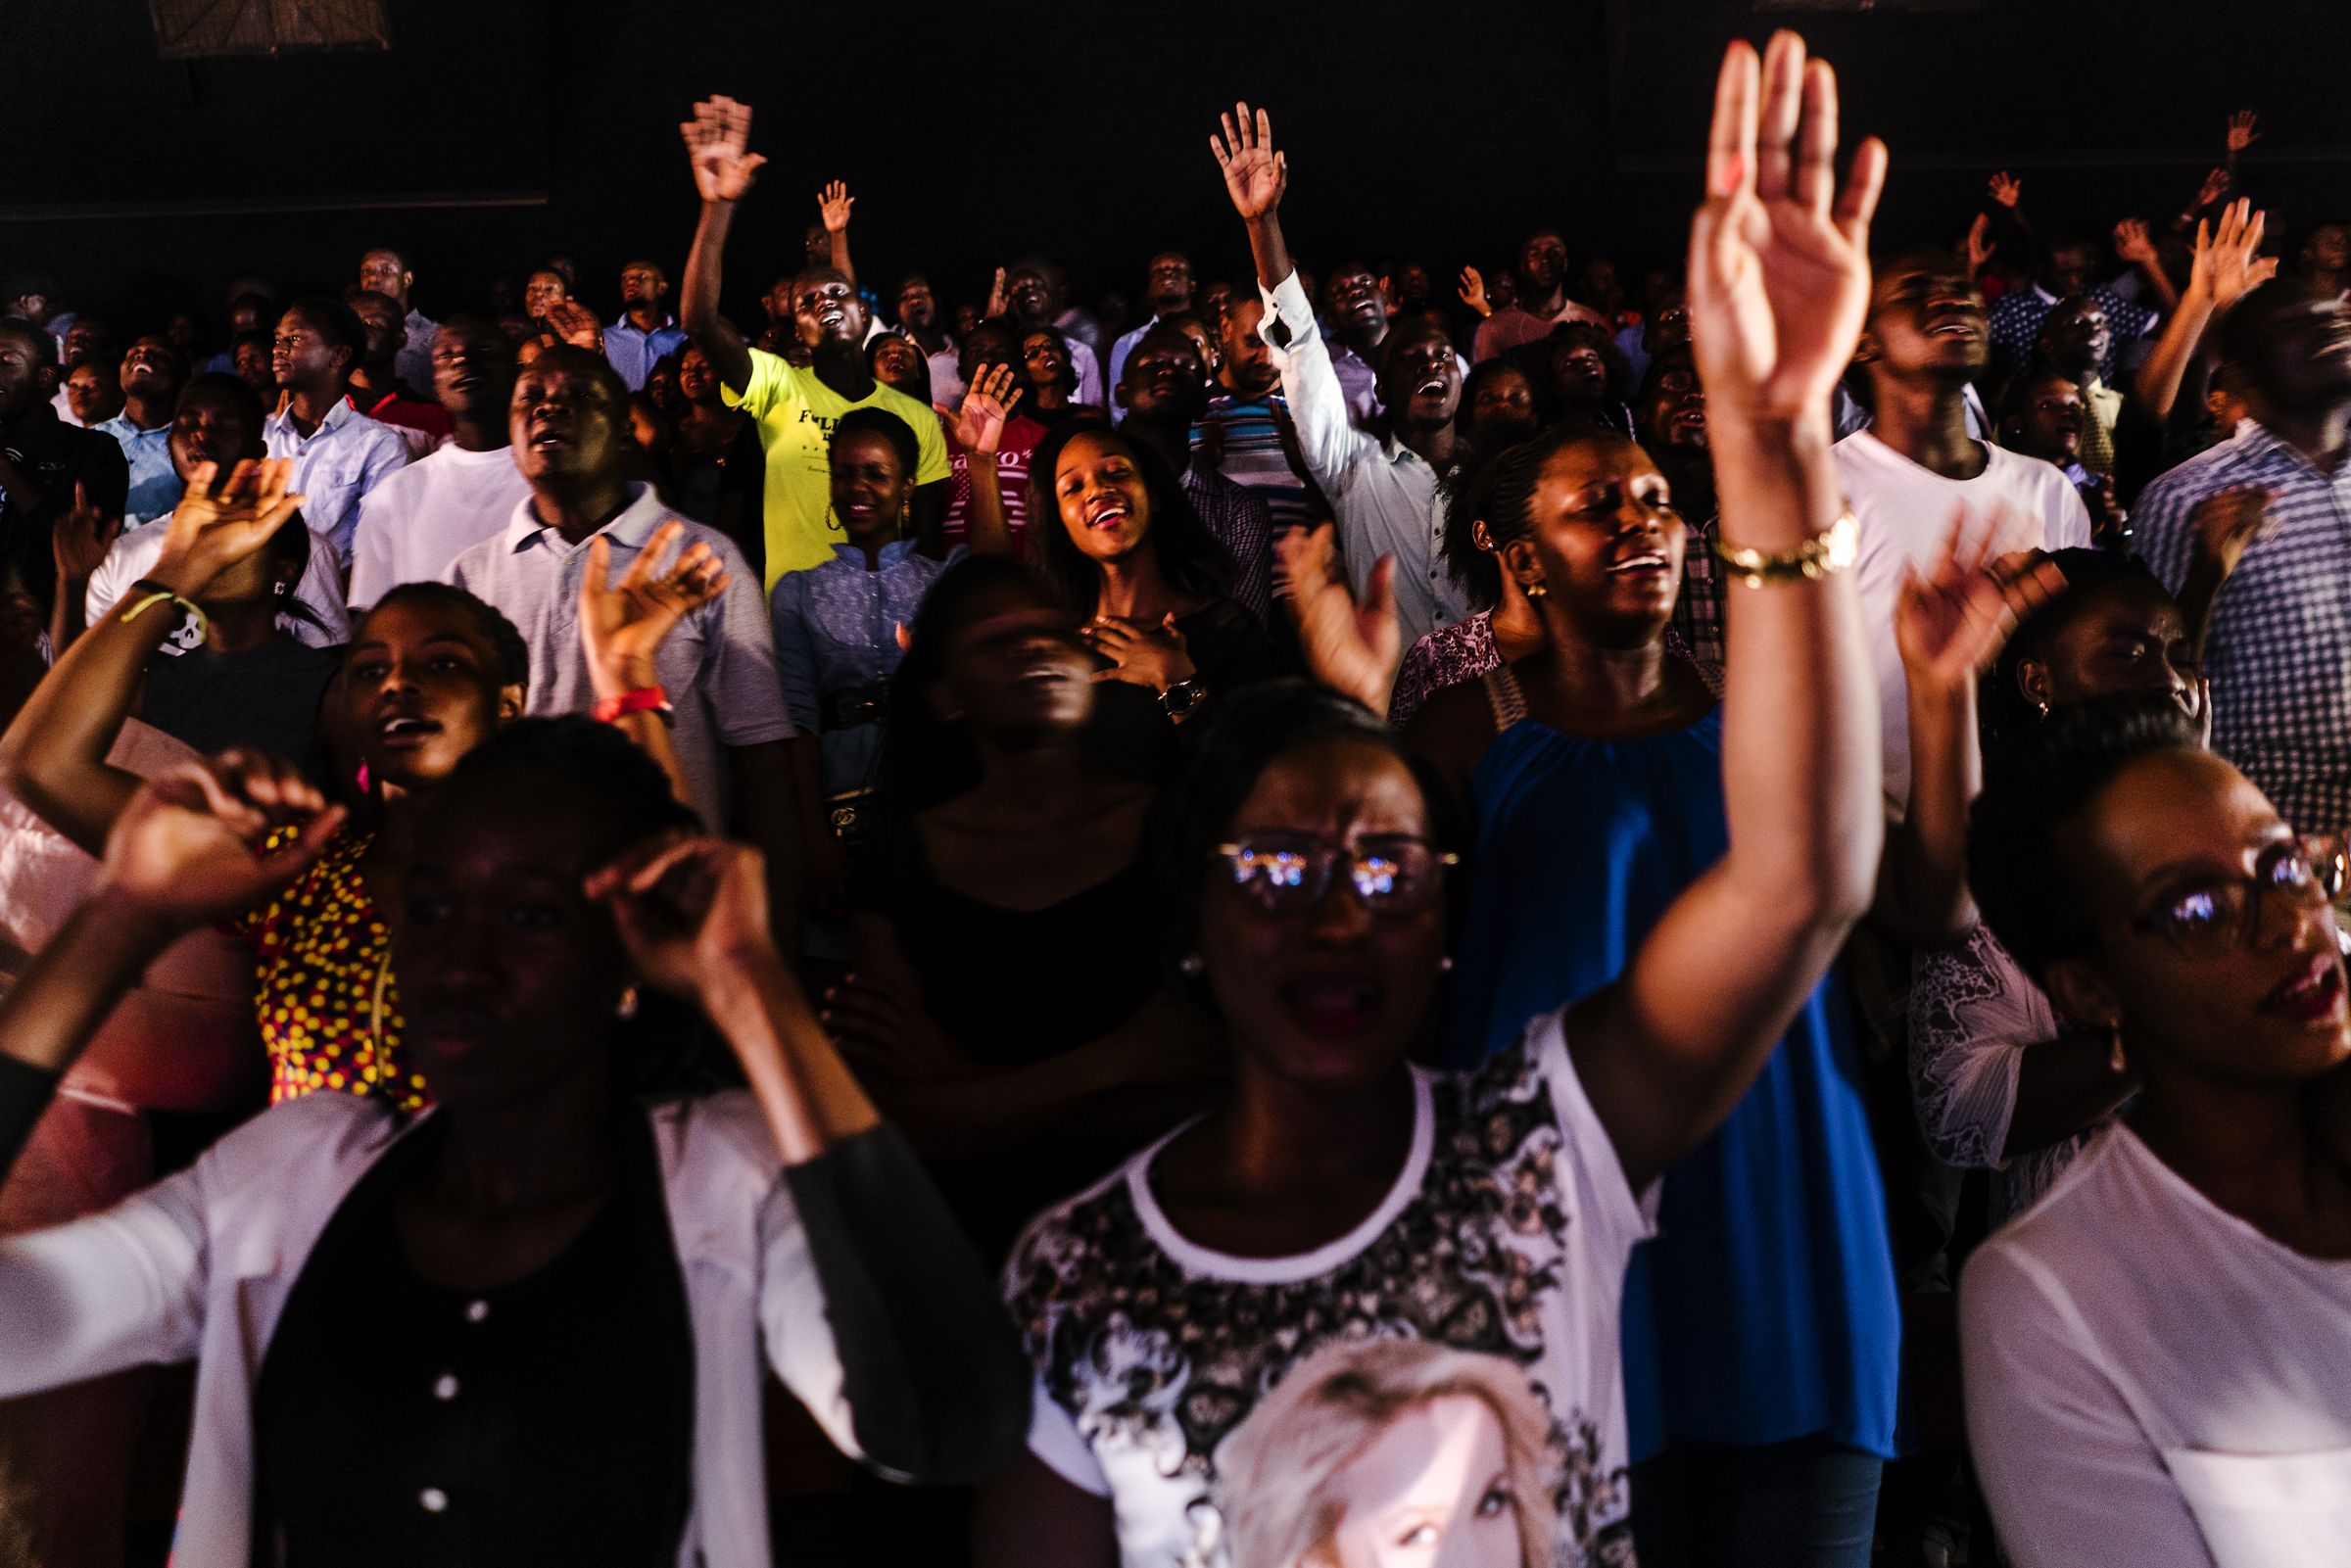 Worshippers sing during a Sunday service at Watoto church, an English speaking Pentecostal church, in downtown Kampala. Activists say Watoto, led by American pastor Gary Skinner,  has been instrumental in spreading homophobia, including through hosting American evangelical Scott Lively. Image by Jake Naughton. Uganda, 2017.